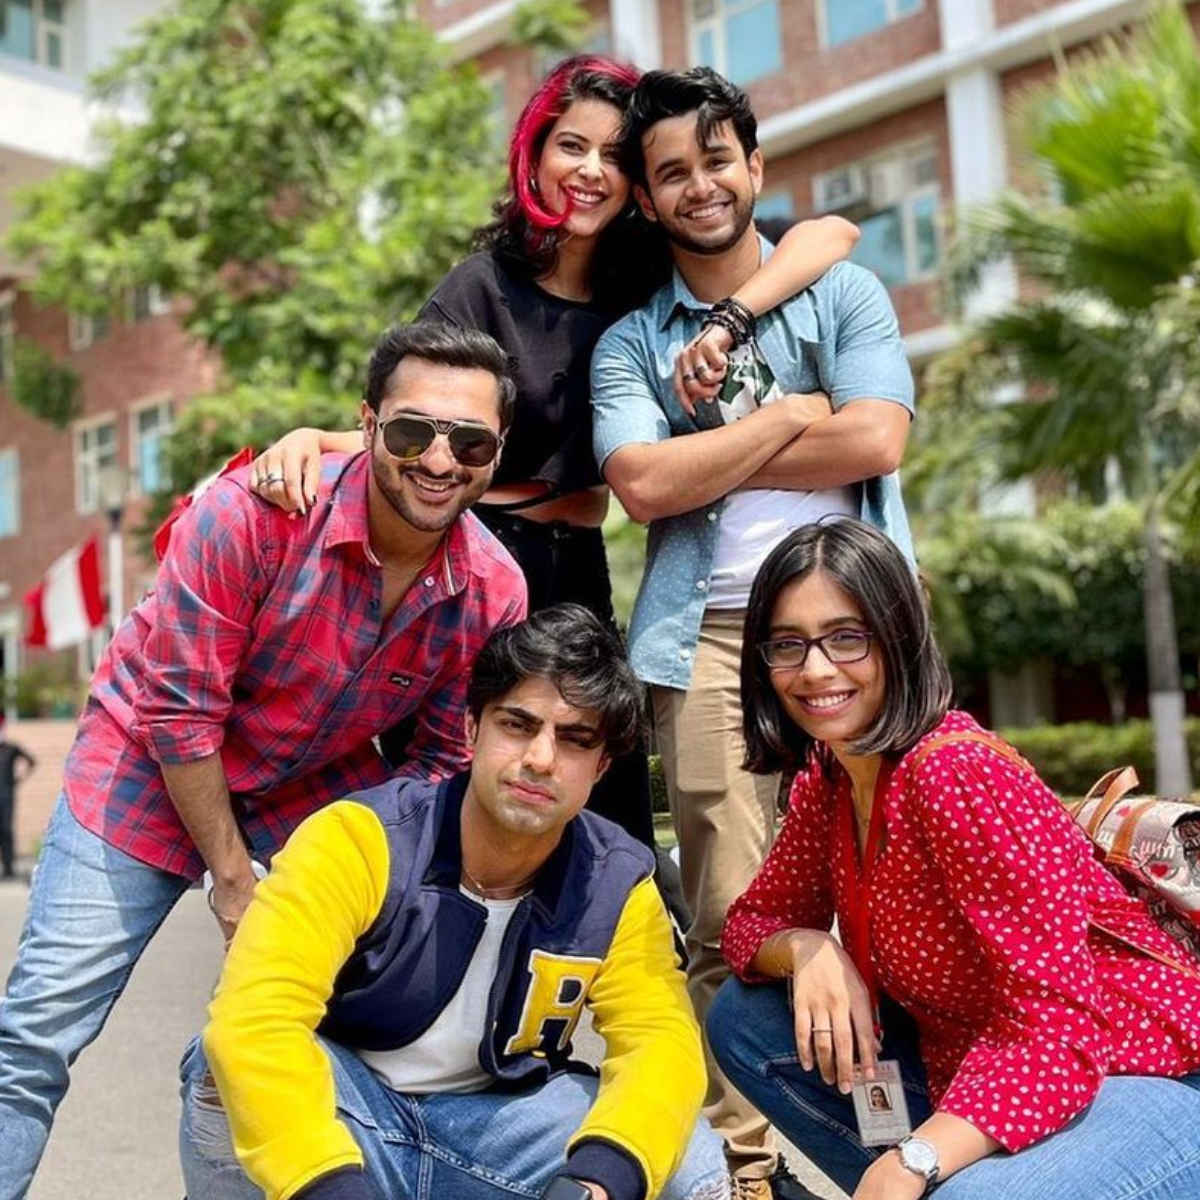 Campus Diaries Ep 1 Review: A relatable ode to college life full of friendships, ragging and more